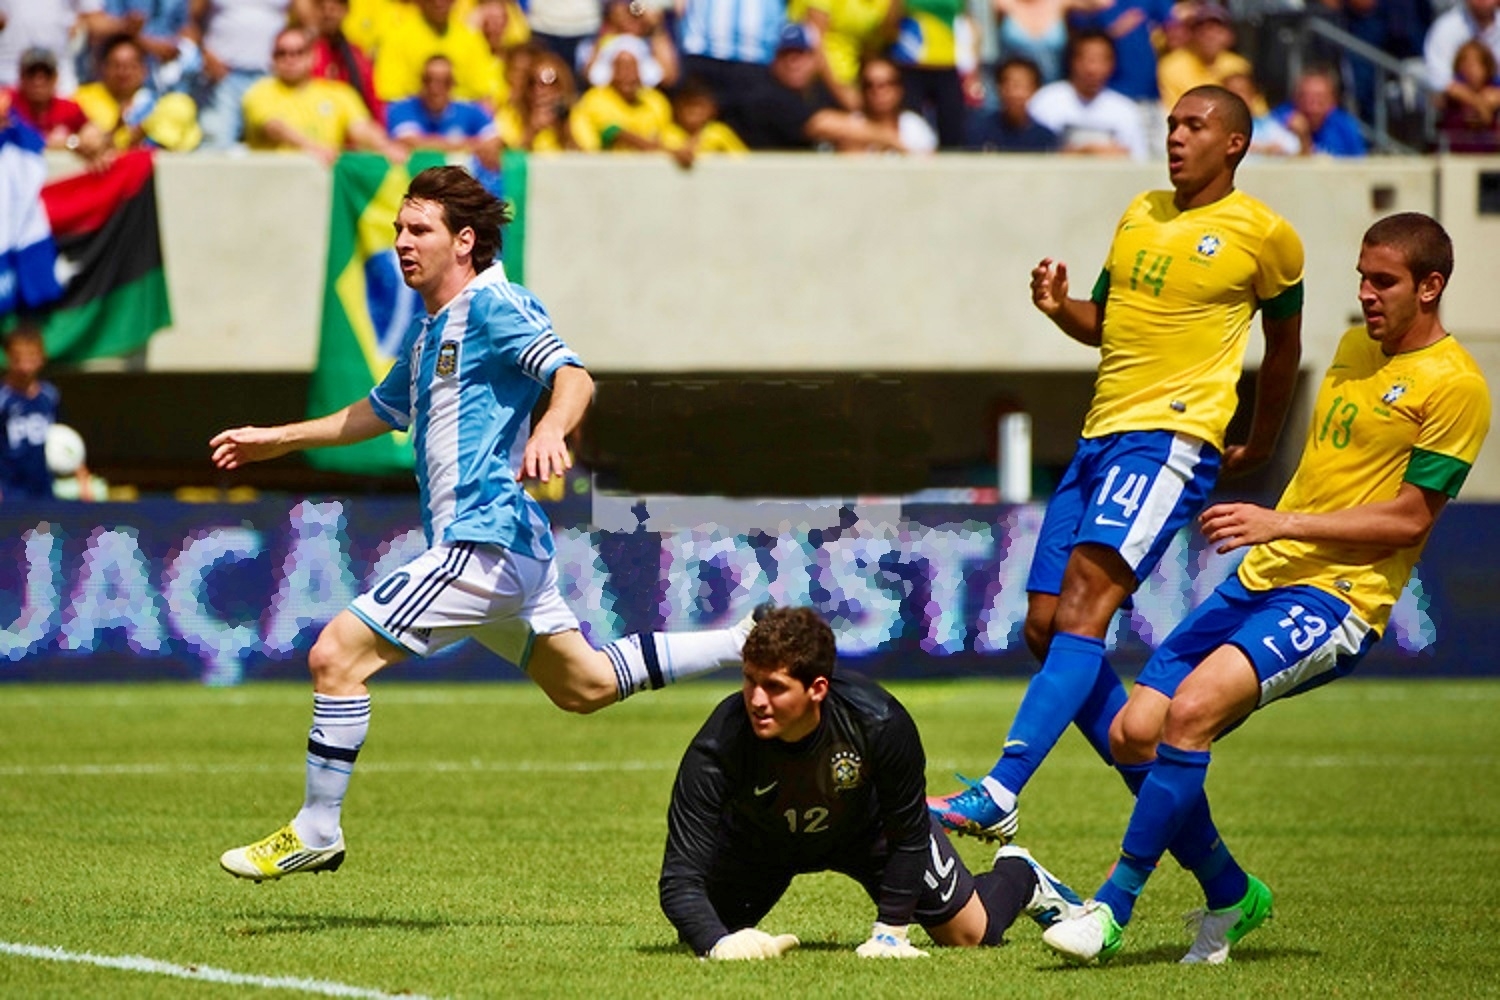 Lionel Messi (10) of Argentina (ARG) watches his first goal go in. Argentina defeated Brazil 4-3 in an international friendly at MetLife Stadium in East Rutherford, NJ, on June 9, 2012.